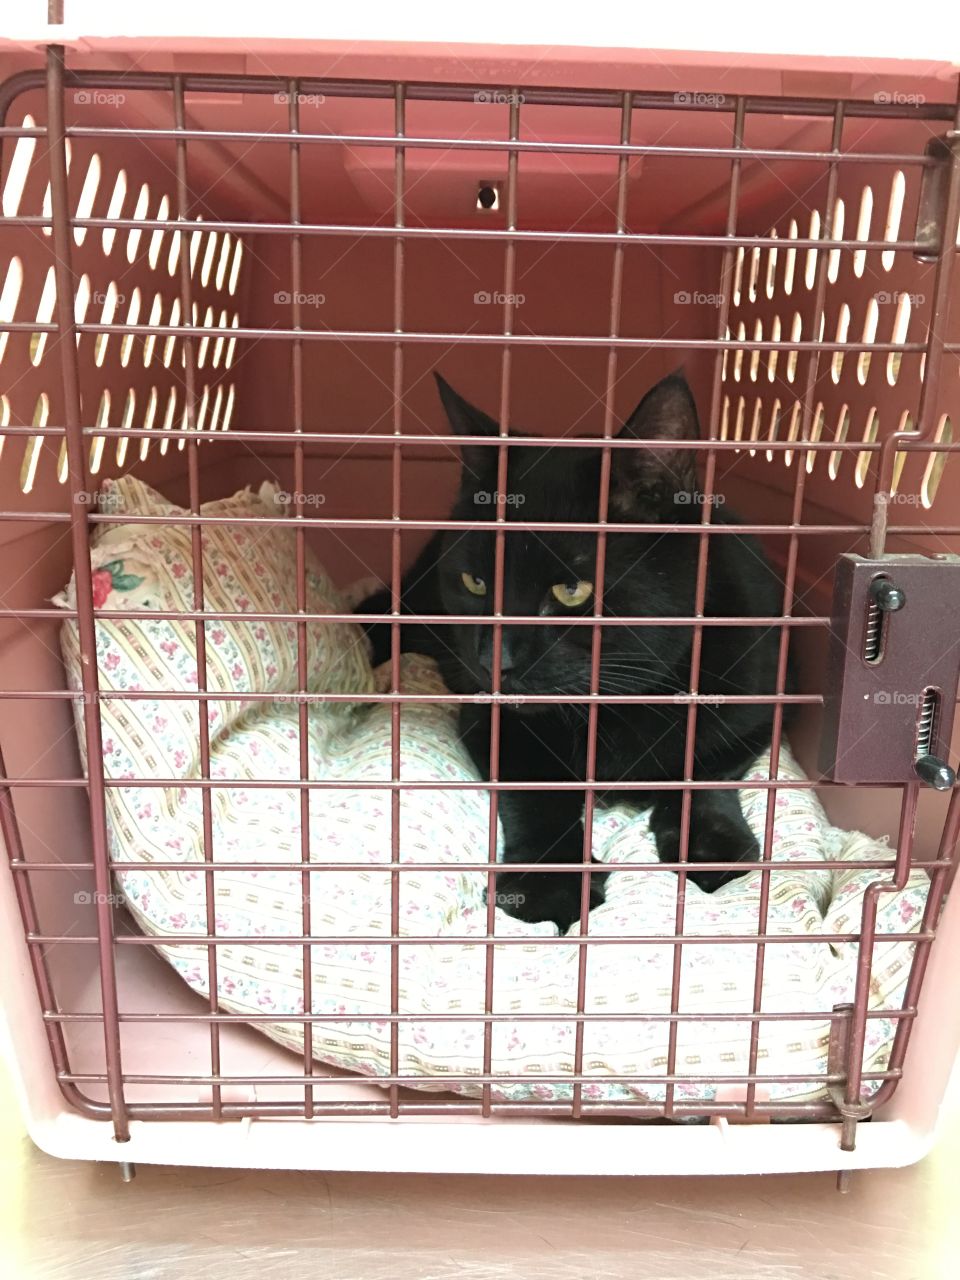 At the Vet doctor appointment, waiting to be called. Velvet, my black cat, is scared but she's safe in her carrier with me.